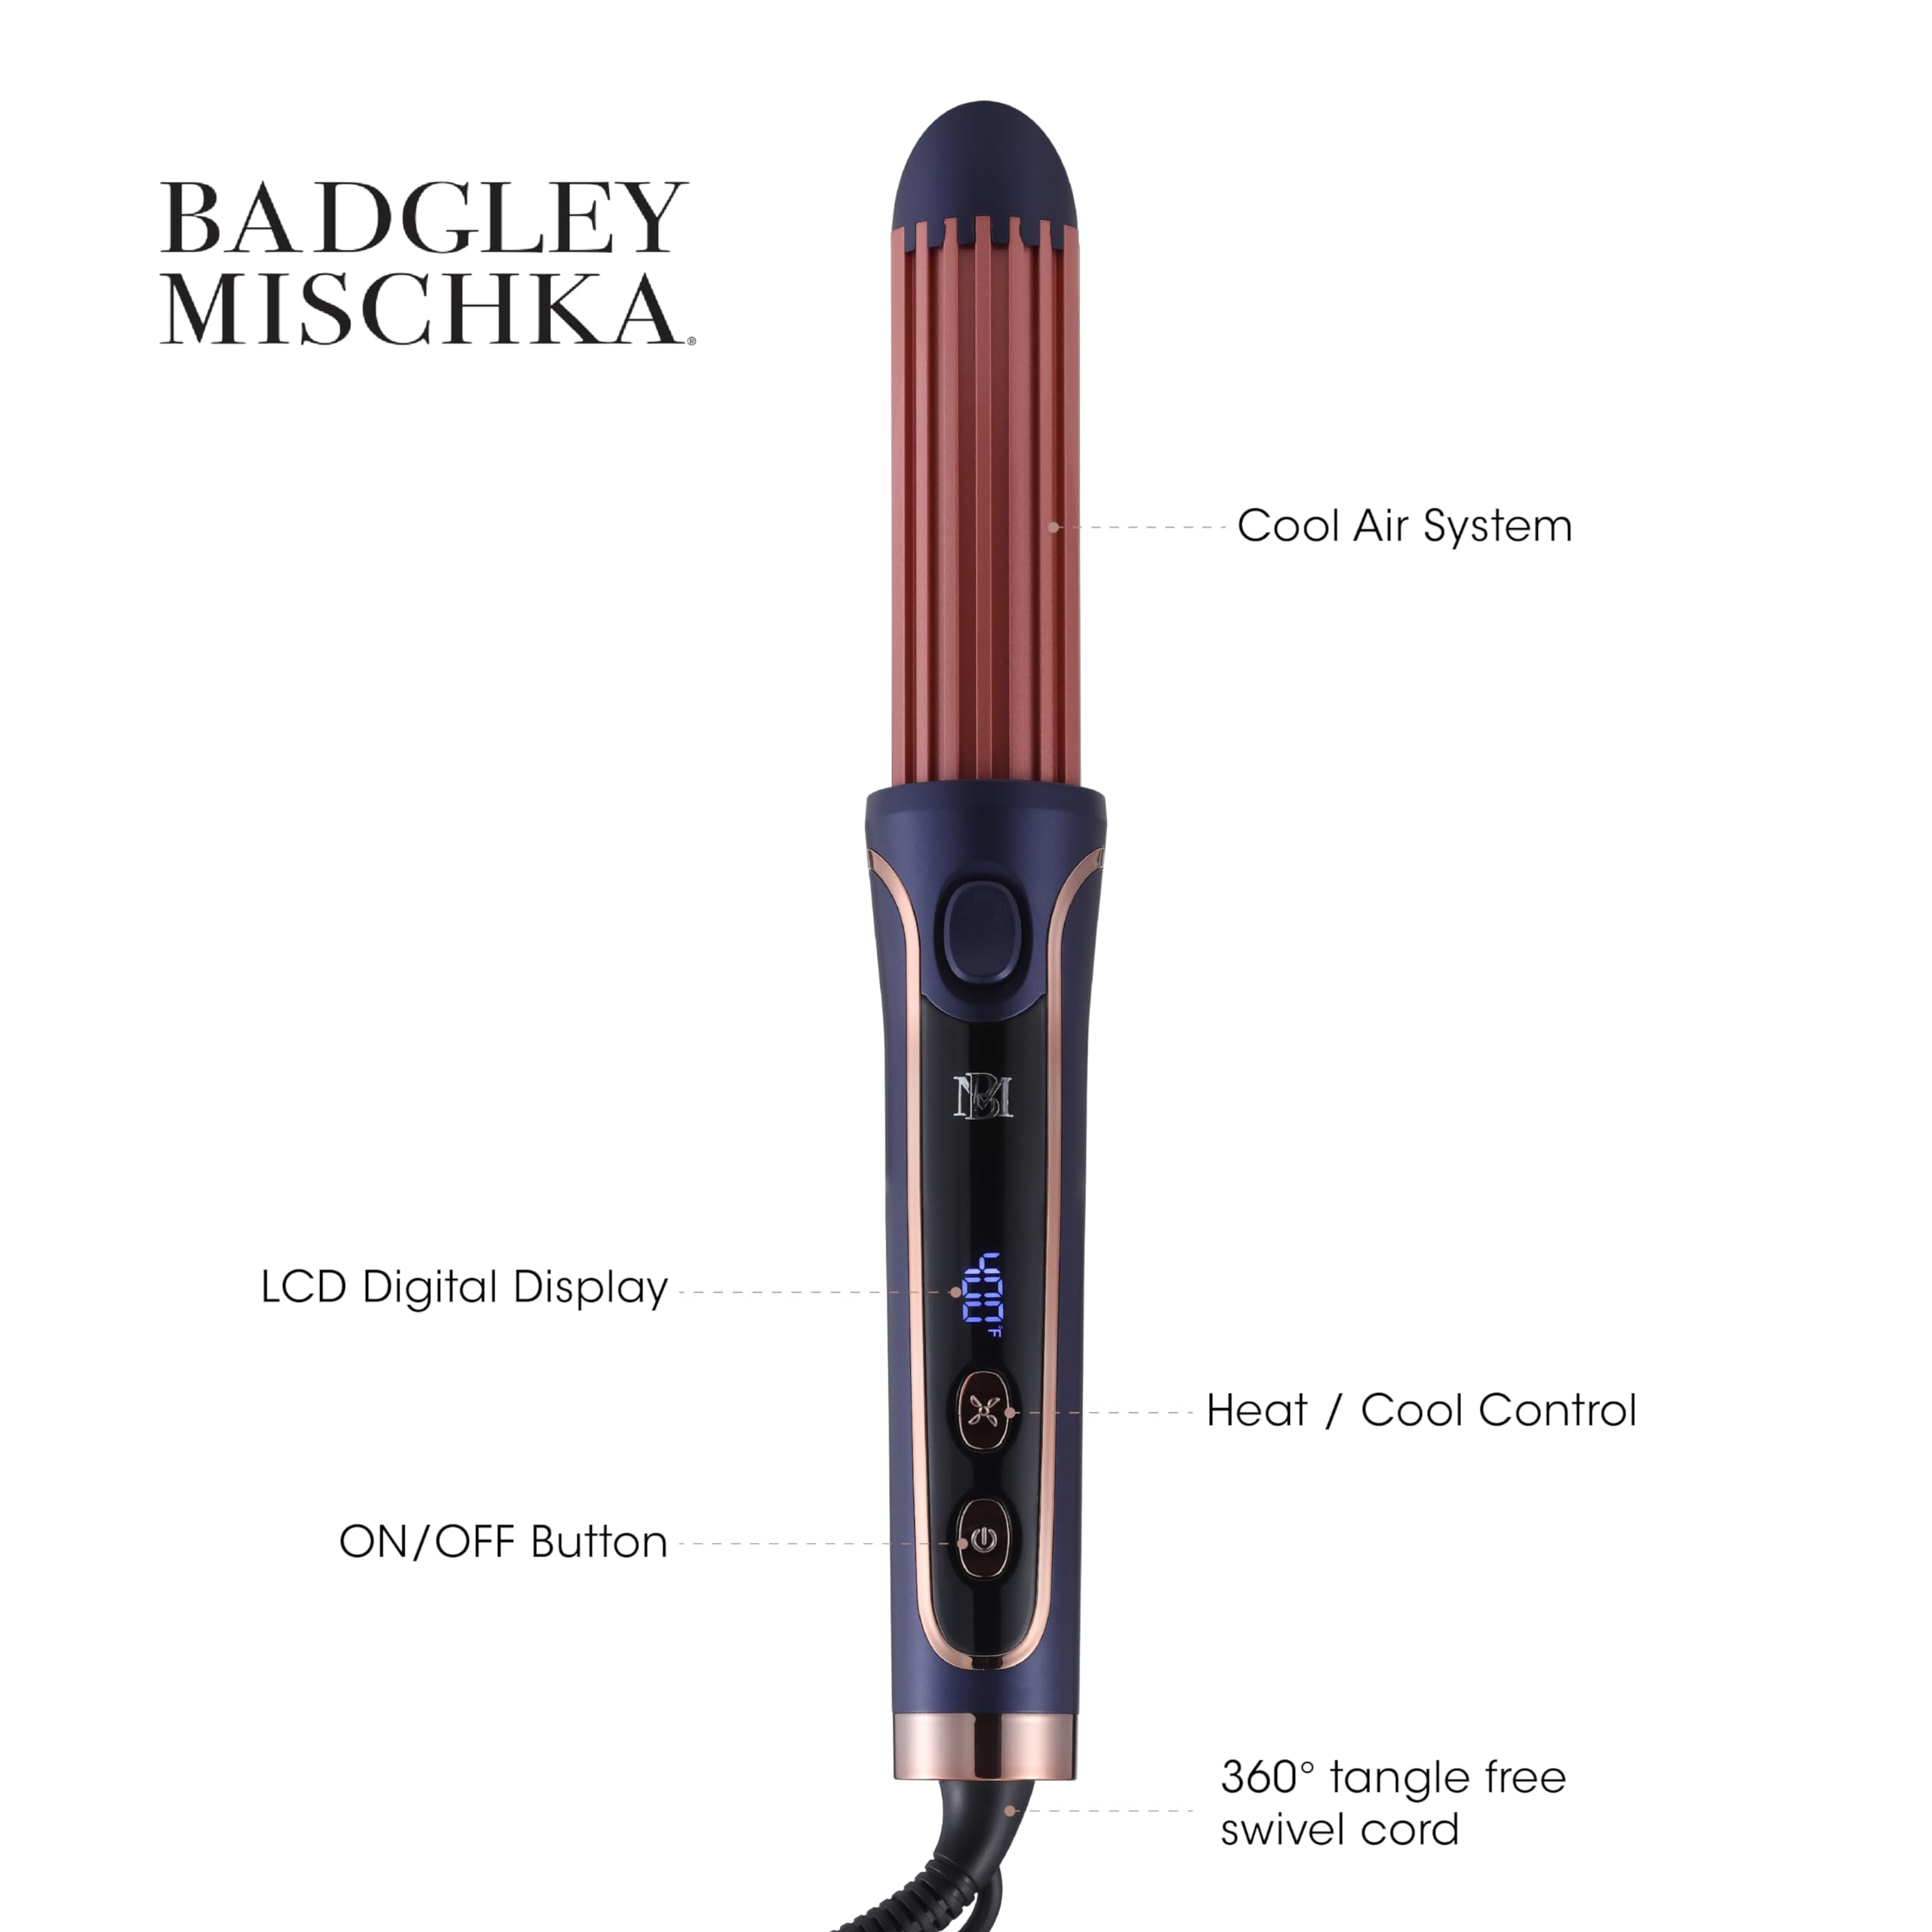 Badgley Mischka 2-in-1 Curling Iron and Hair Straightener Air Styler, Silky Smooth Straight & Bouncy Curls, Ceramic Plates up to 400°F, Digital Display with Heat & Cool Control, Auto Safety Shut Off